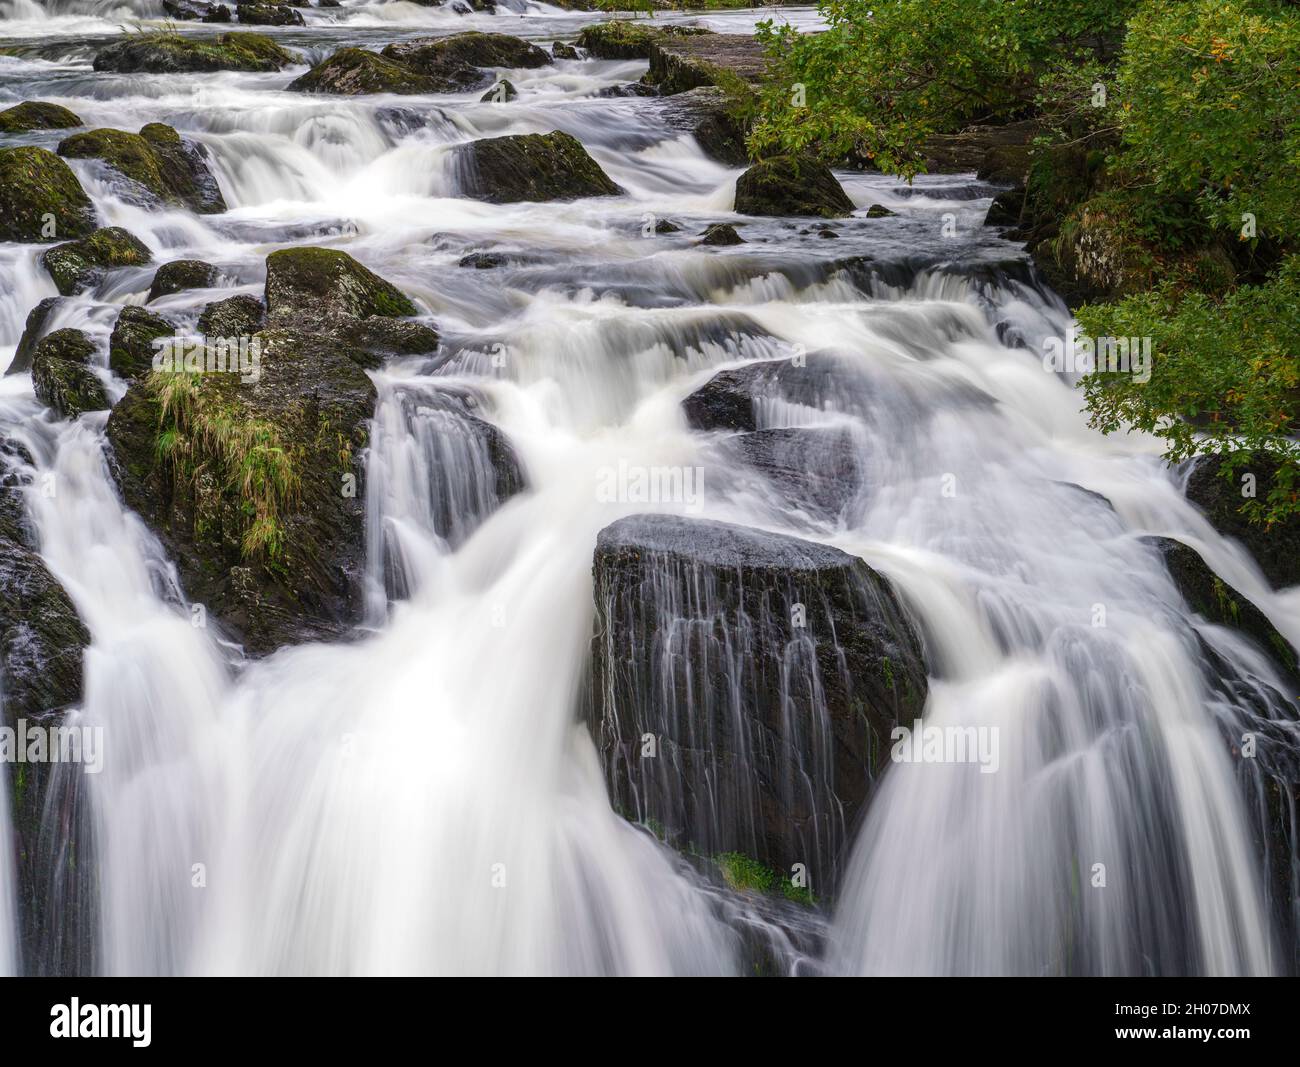 long exposure of white water cascading over the magnificent Rhaeadr Ewynnol Swallow Falls Waterfall, Betws-y-coed, Snowdonia National Park, Wales UK Stock Photo